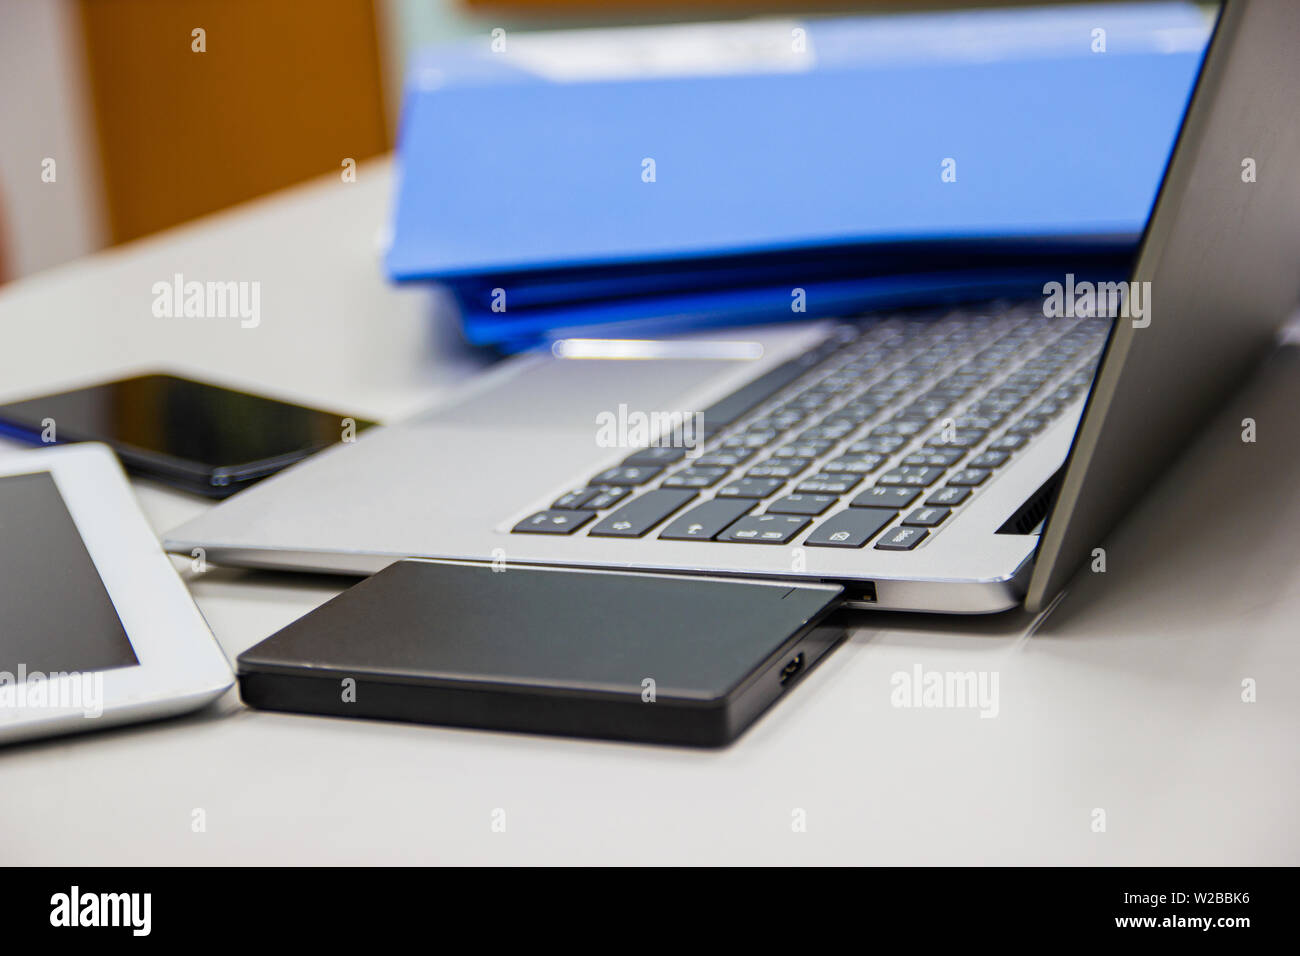 laptop computer on desk table in work office and  external Harddisk ,files folder , concept business life work office Stock Photo